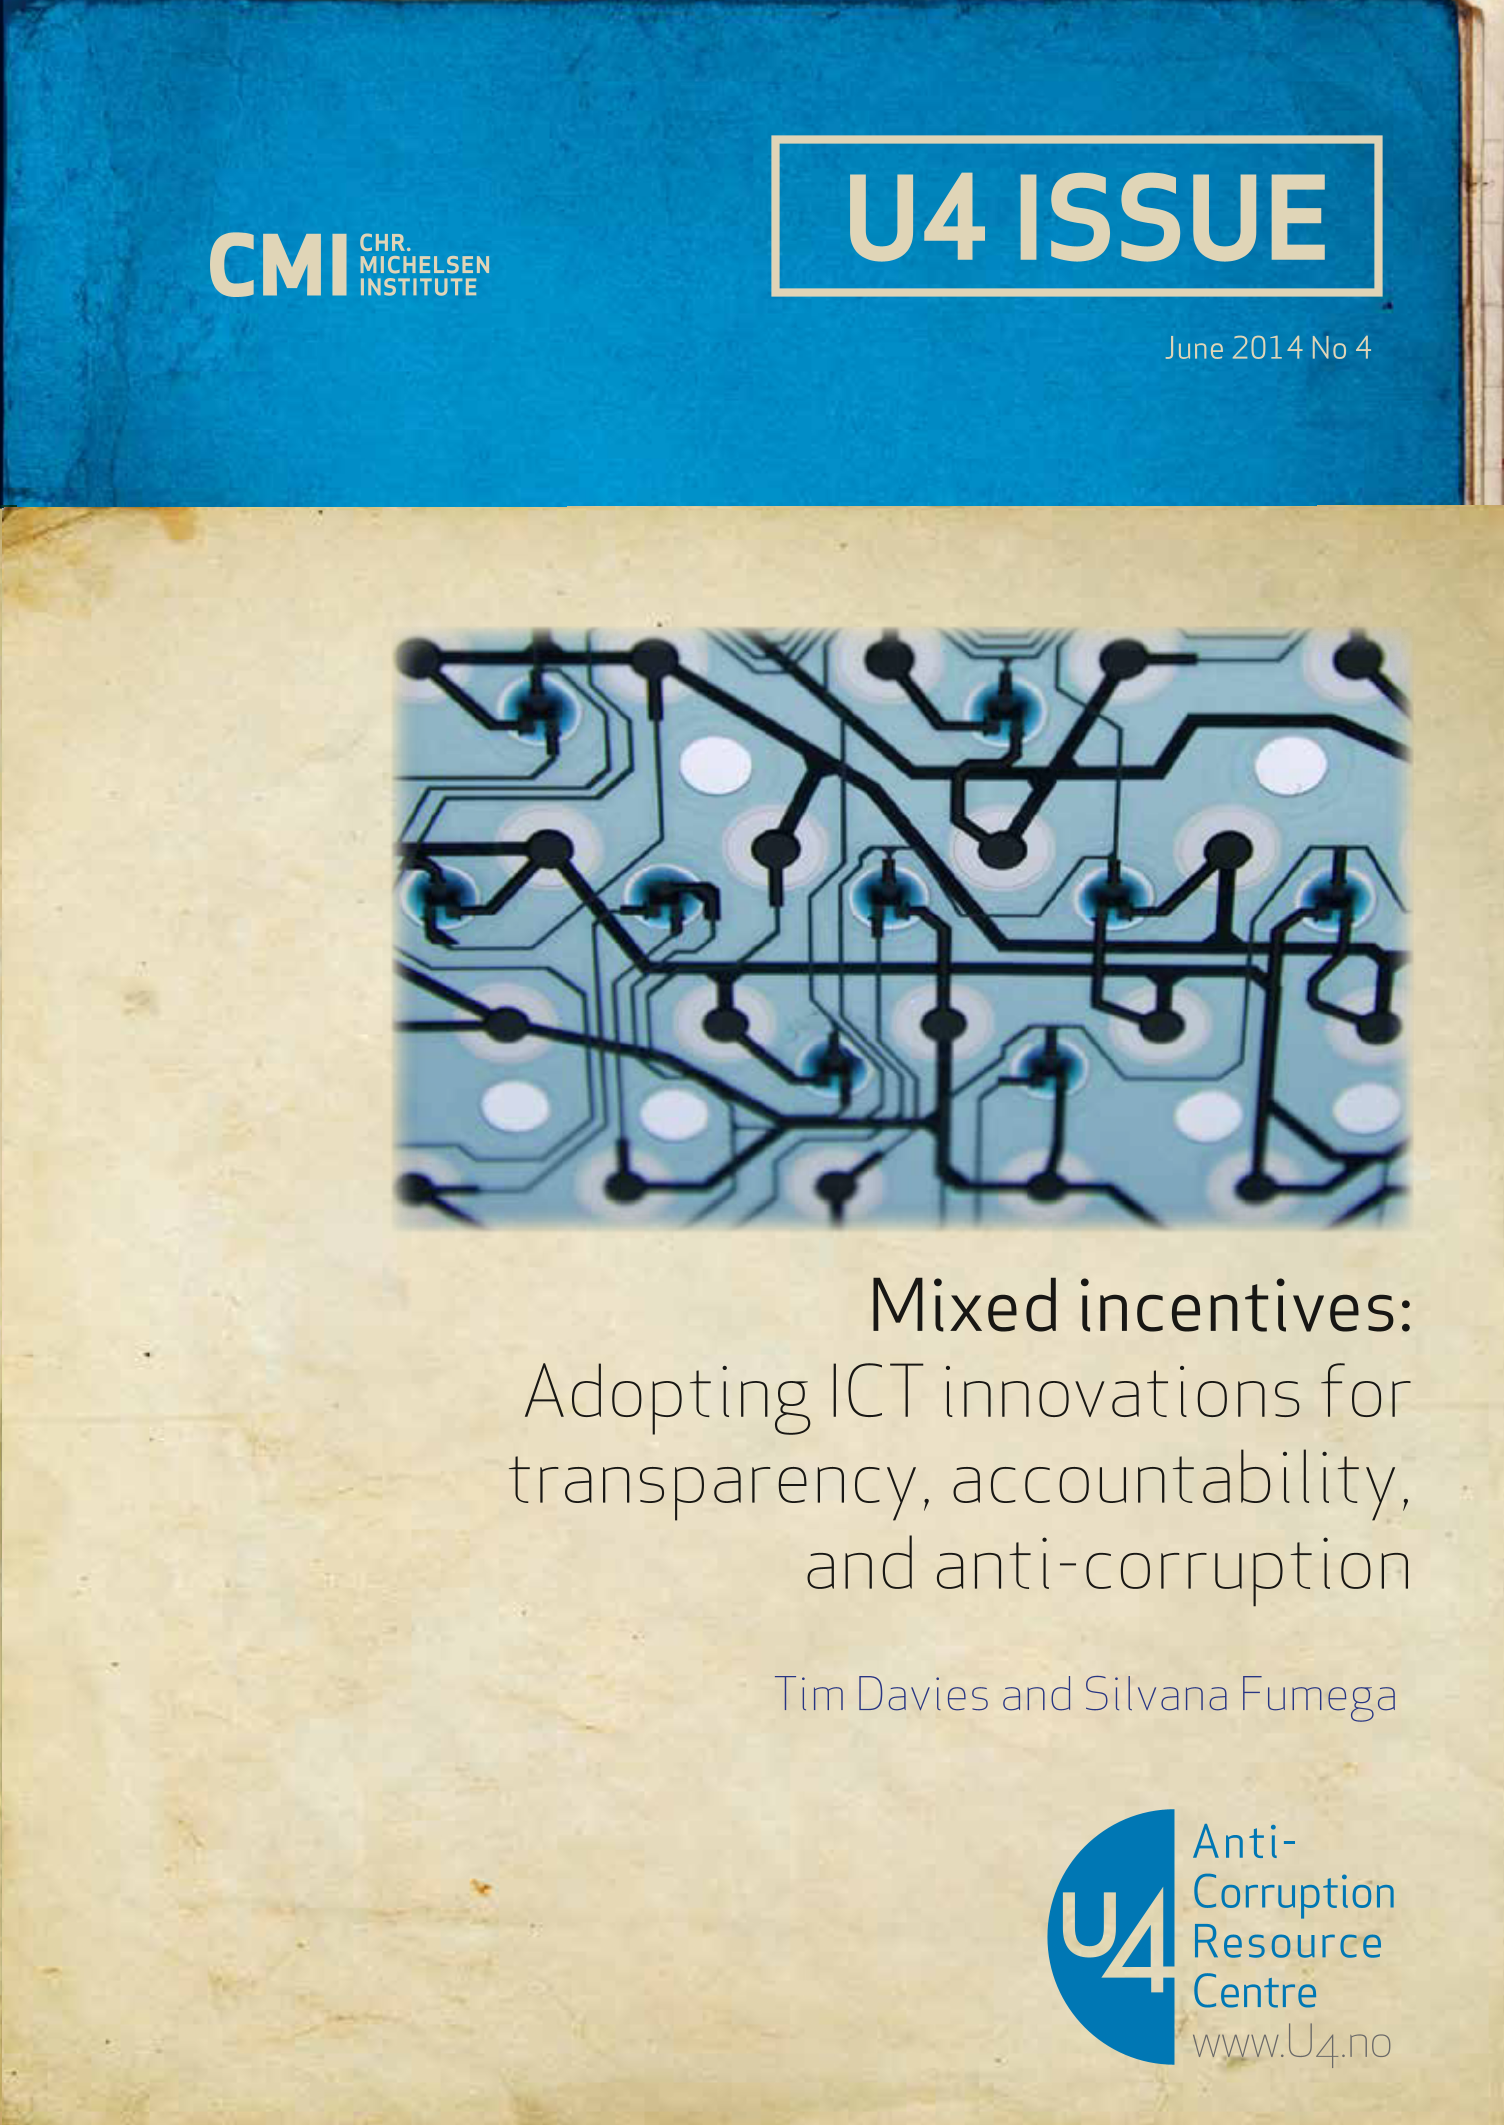 Mixed incentives: Adopting ICT innovations for transparency, accountability, and anti-corruption